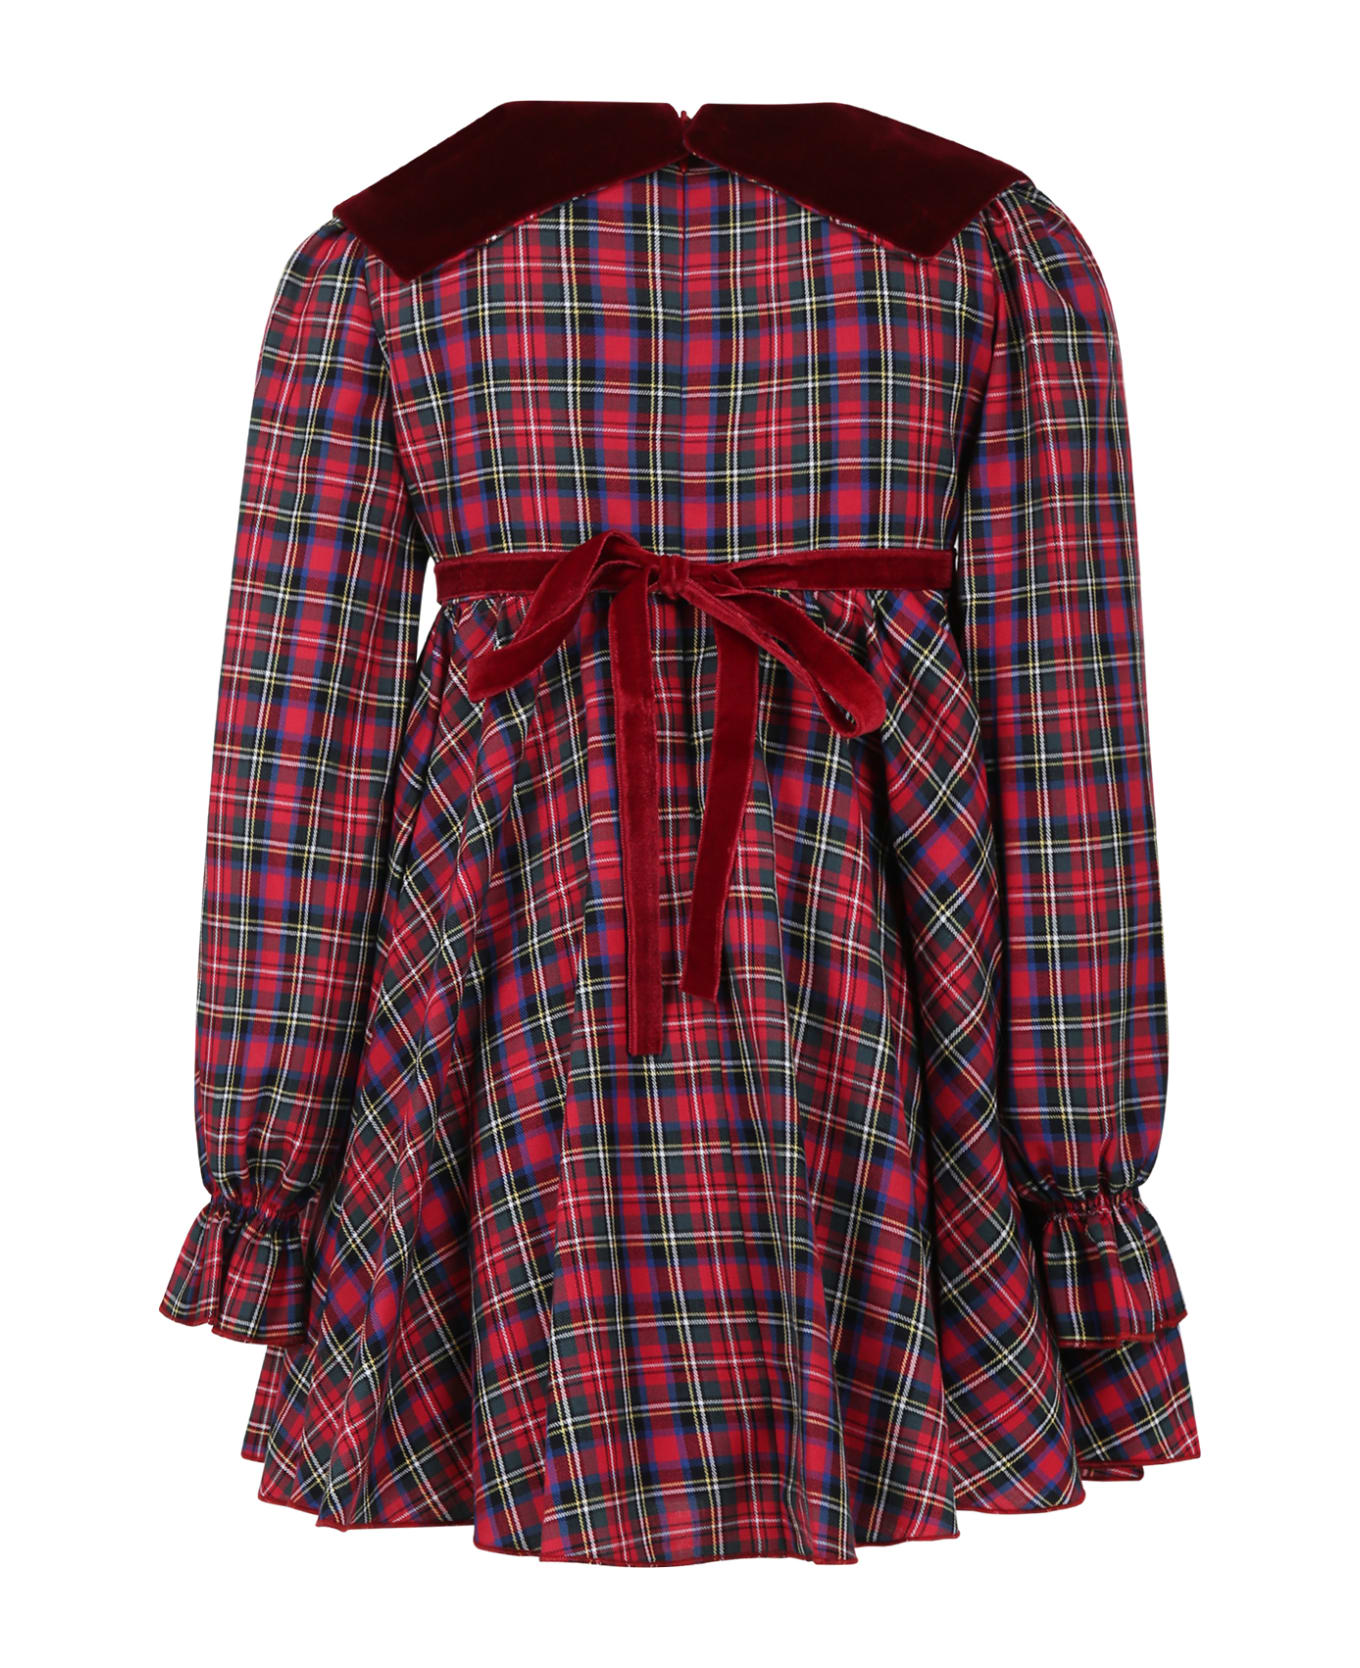 La stupenderia Elegant Red Dress For Girls With Checked Pattern - Red